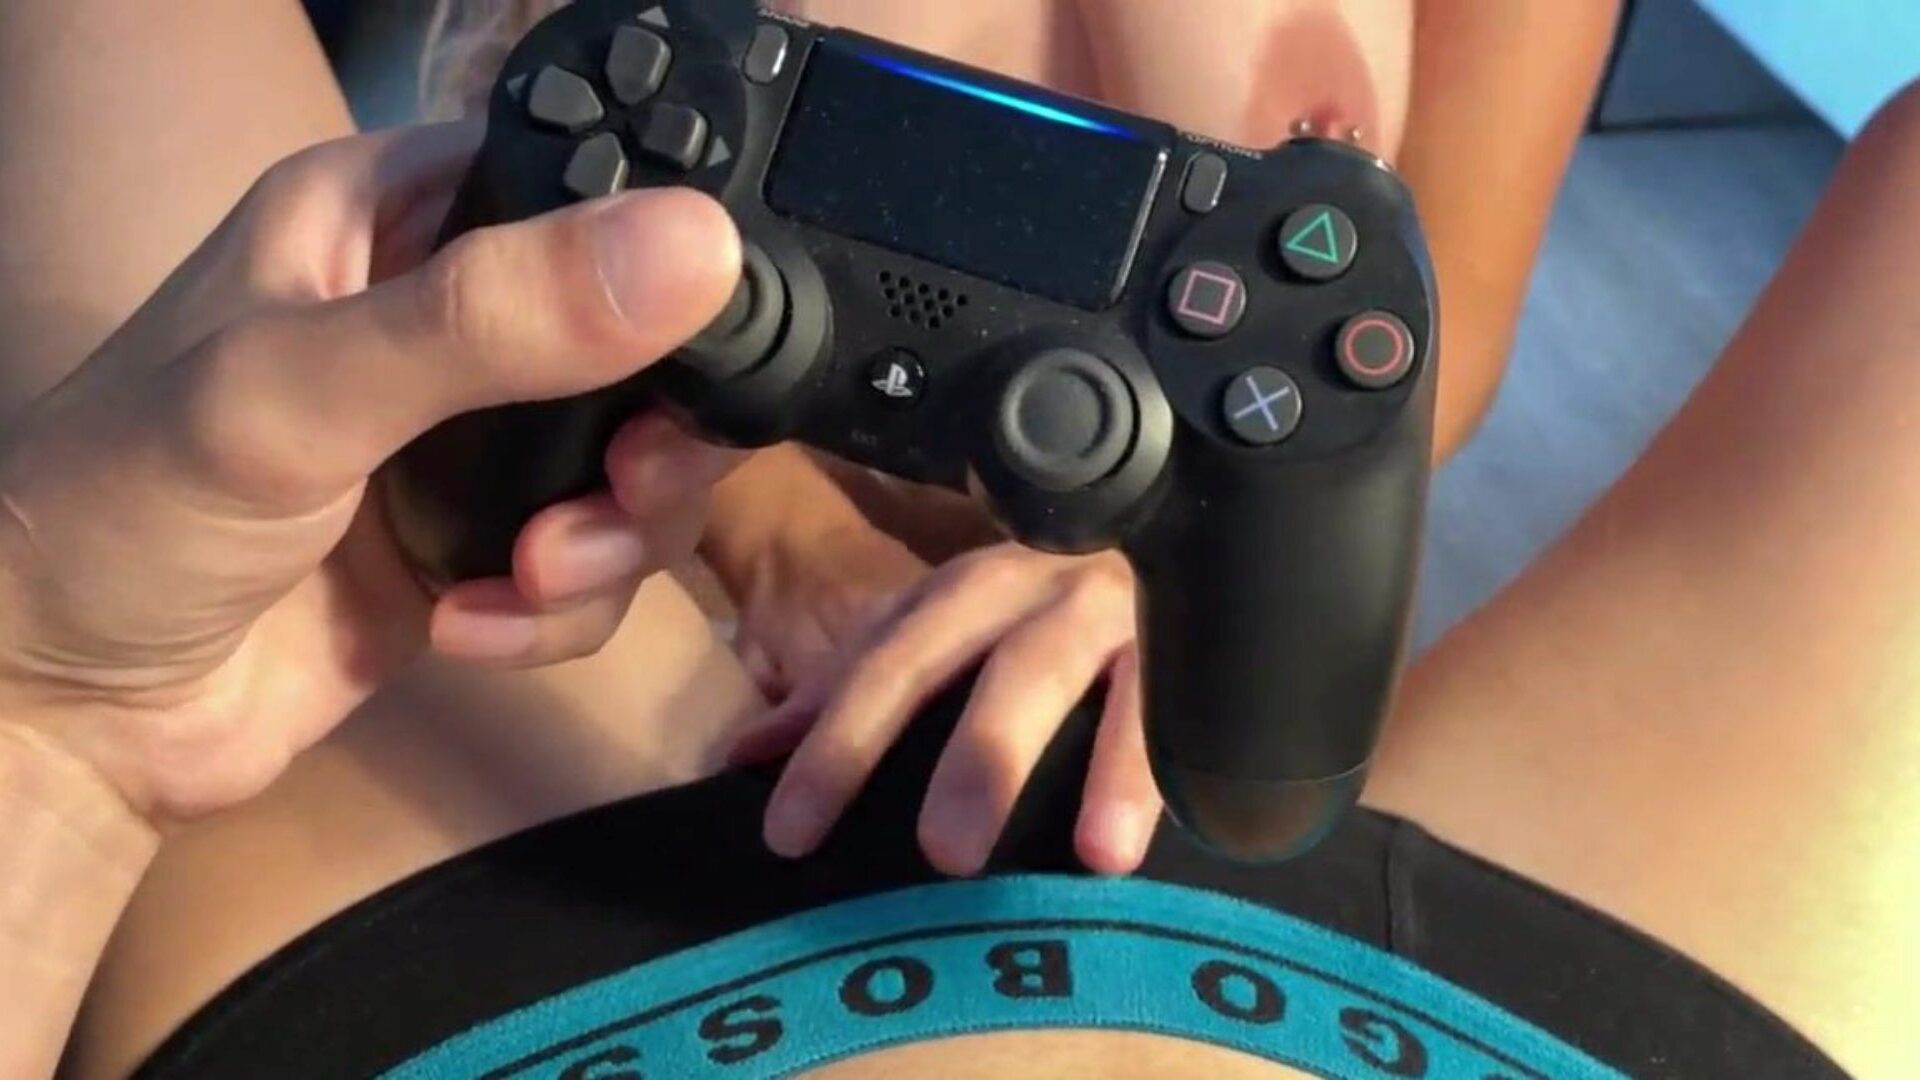 Ripping StepSister's Butt With A Fat Dick For Interfering With PS4 Play